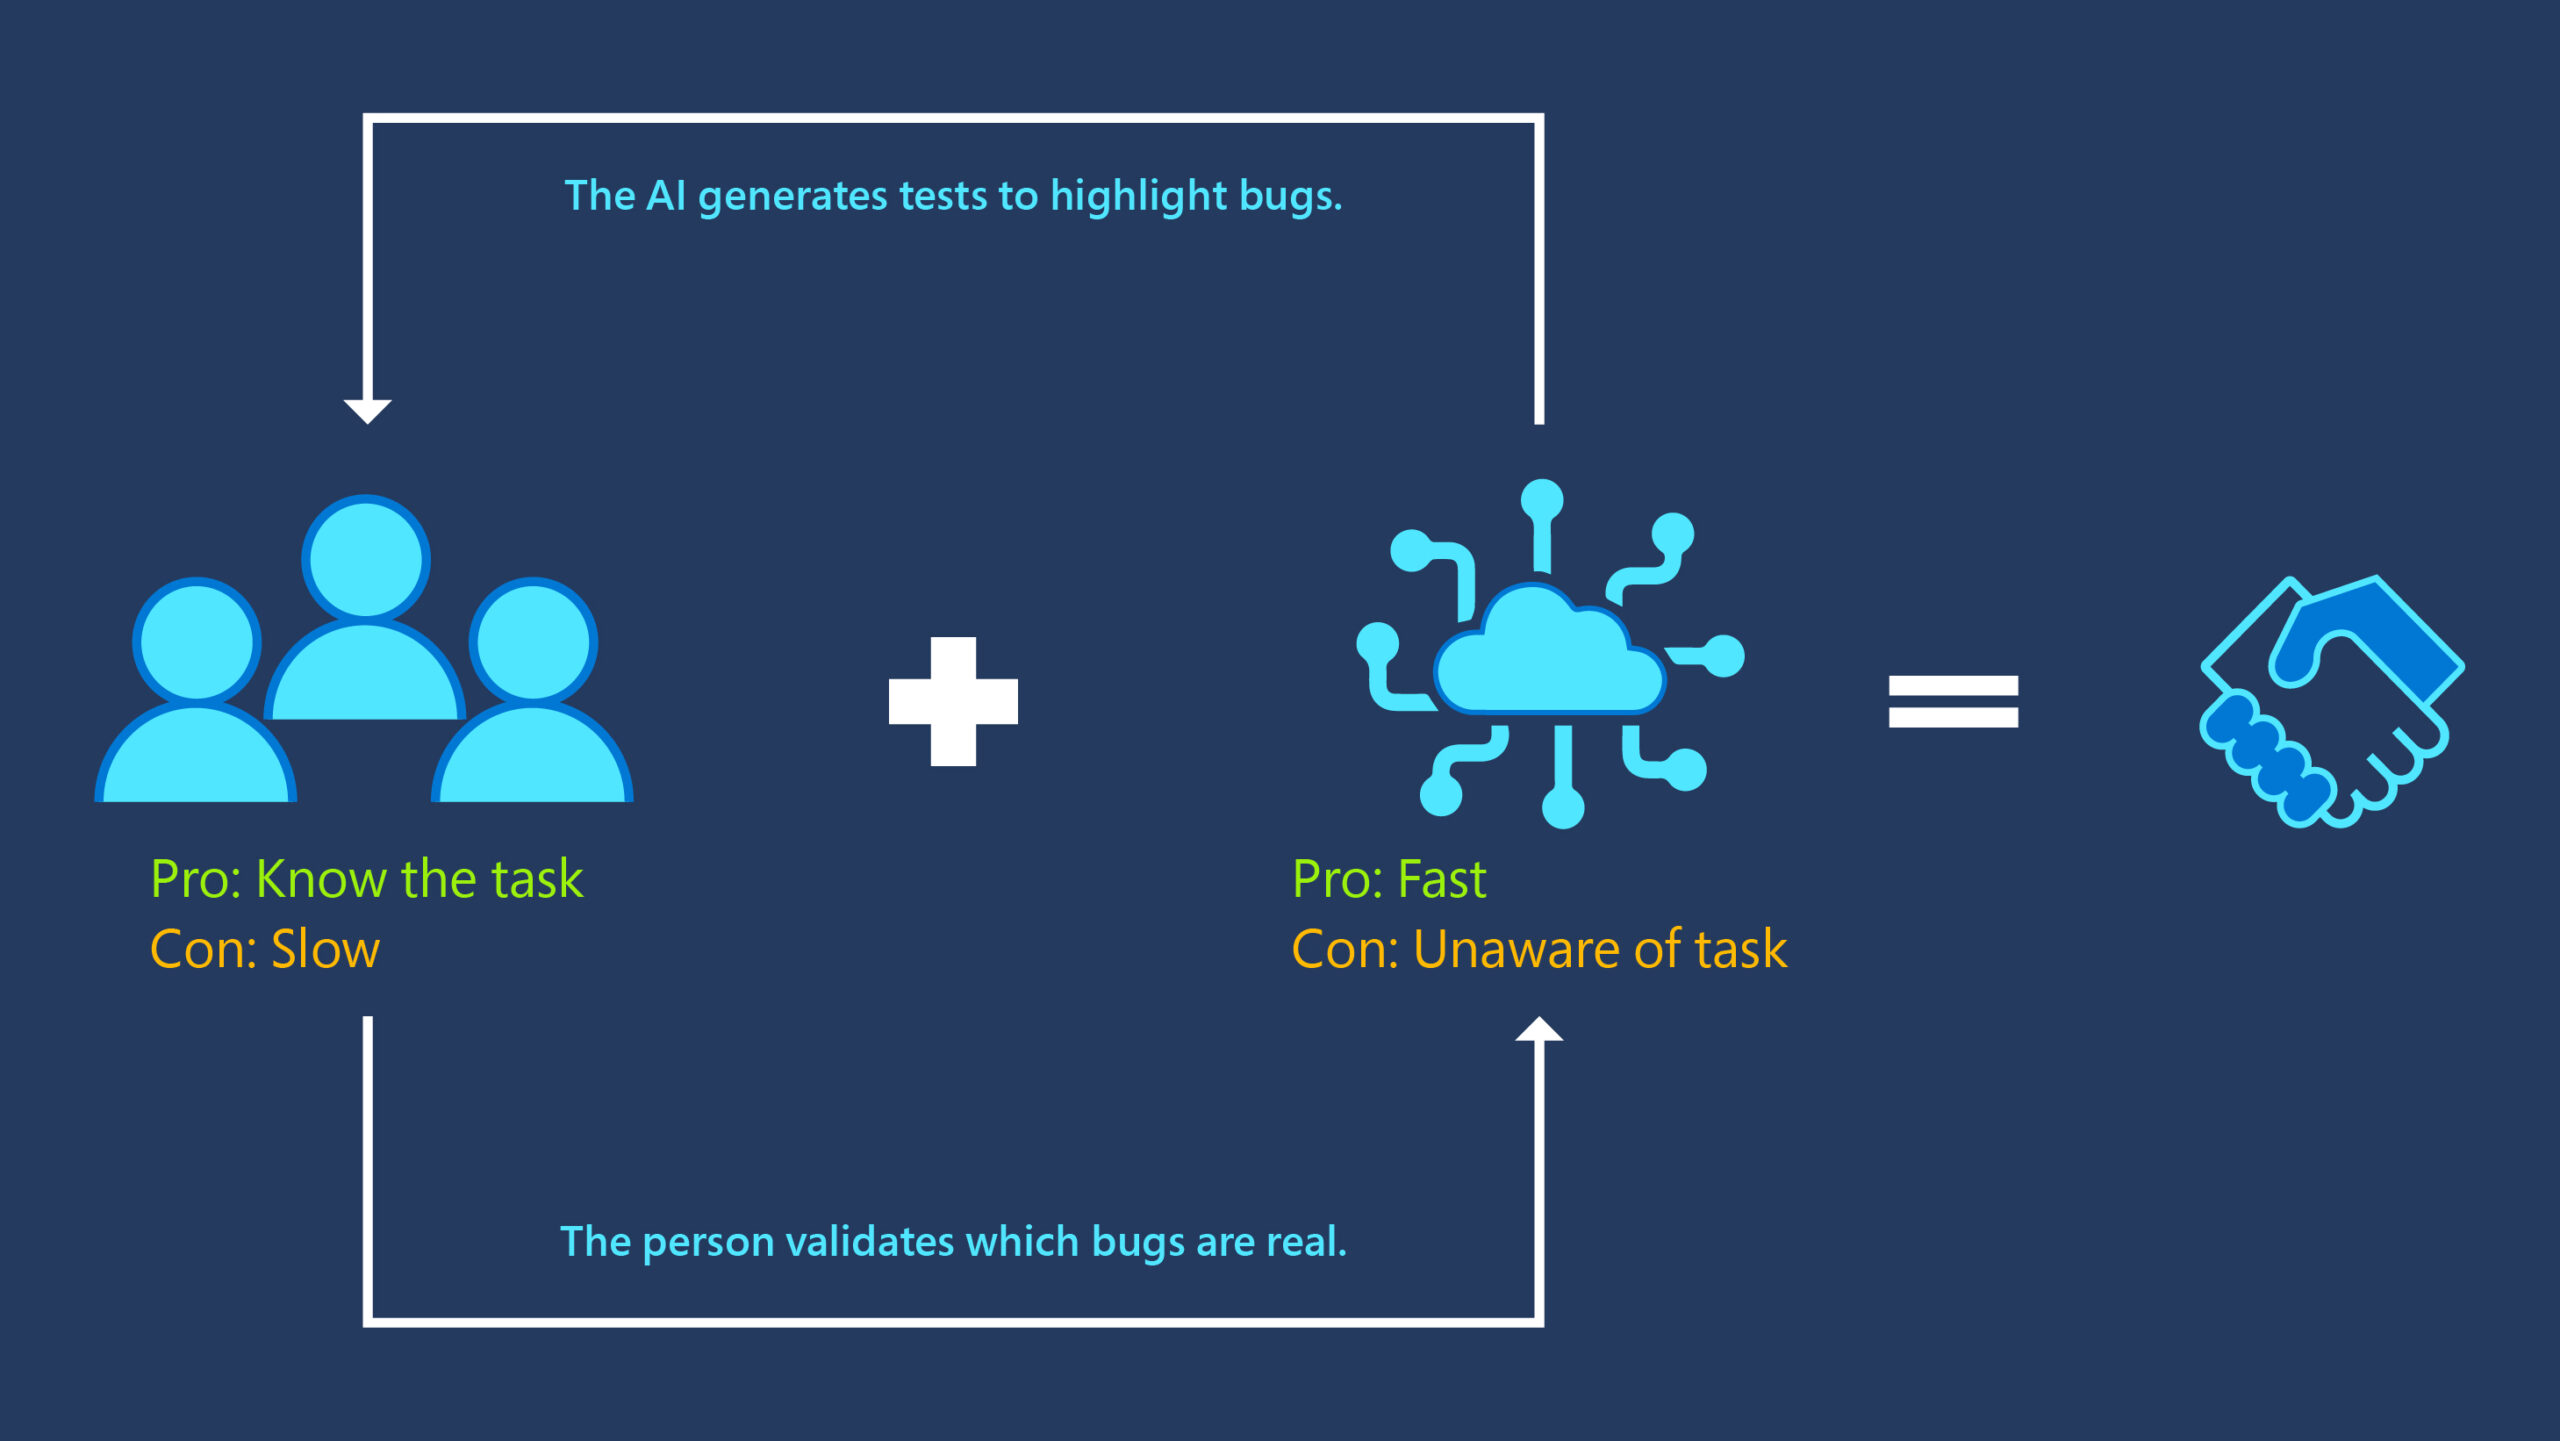 An icon of people labeled with the pro “know the task” and the con “slow” followed by a plus sign and an icon representing AI labeled with the pro “fast” and the con “unaware of task” followed by an equal sign and an icon of shaking hands. An outer arrow labeled “The AI generates tests to highlight bugs” points up and around from the AI icon to the people icon. An arrow labeled “The person validates which bugs are real” points down and around from the people icon to the AI icon, representing an iterative feedback loop.